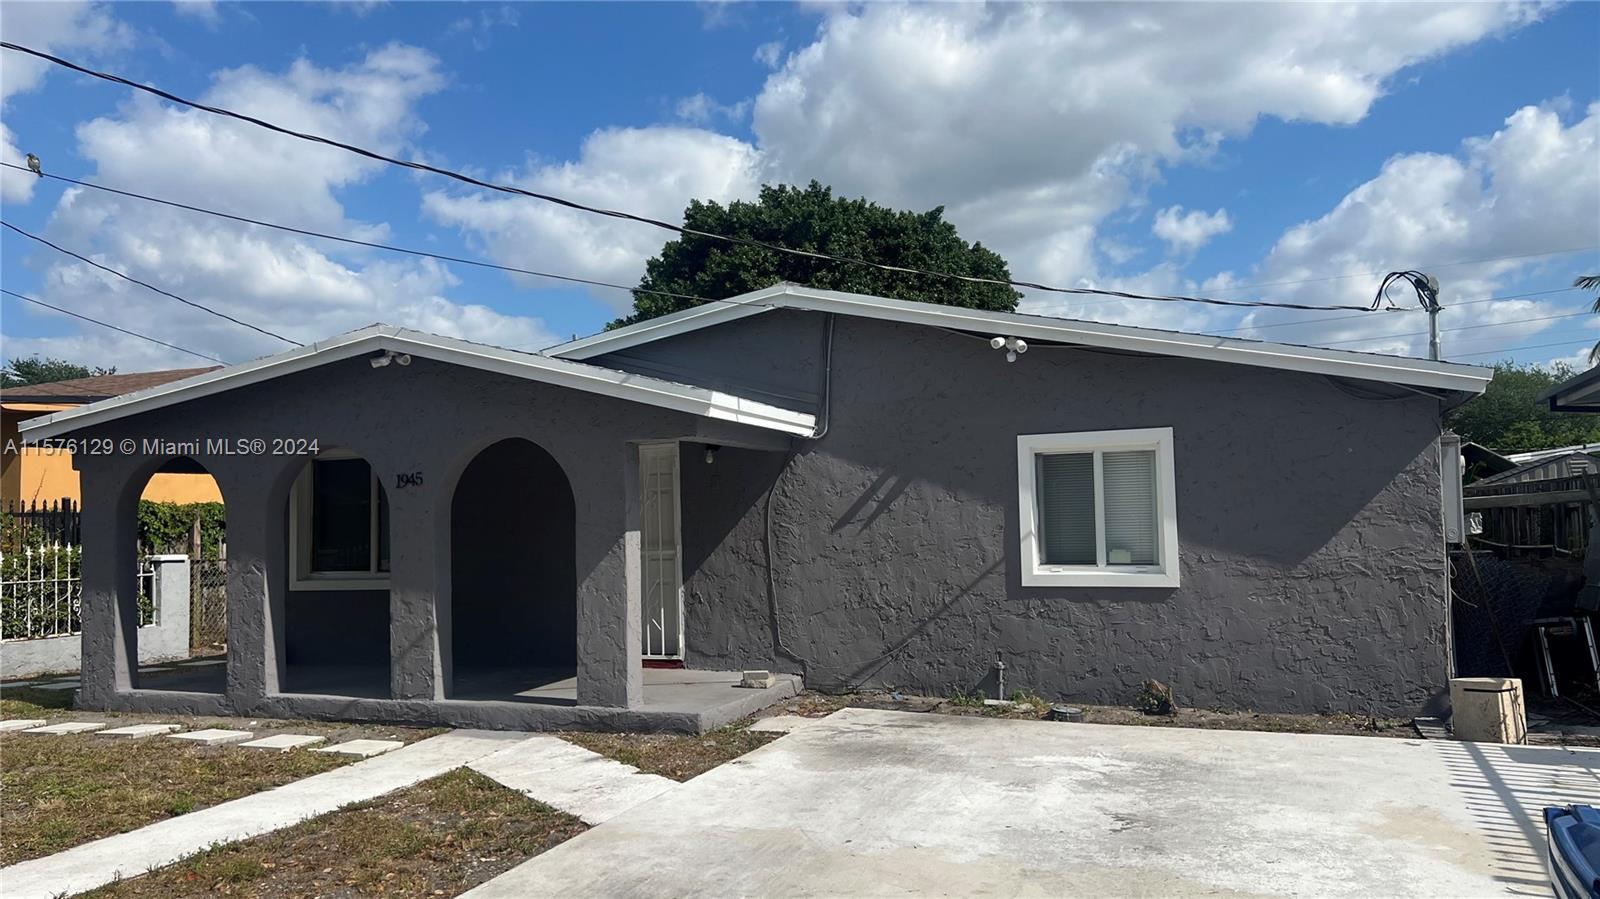 Photo of 1945 NW 86th St in Miami, FL